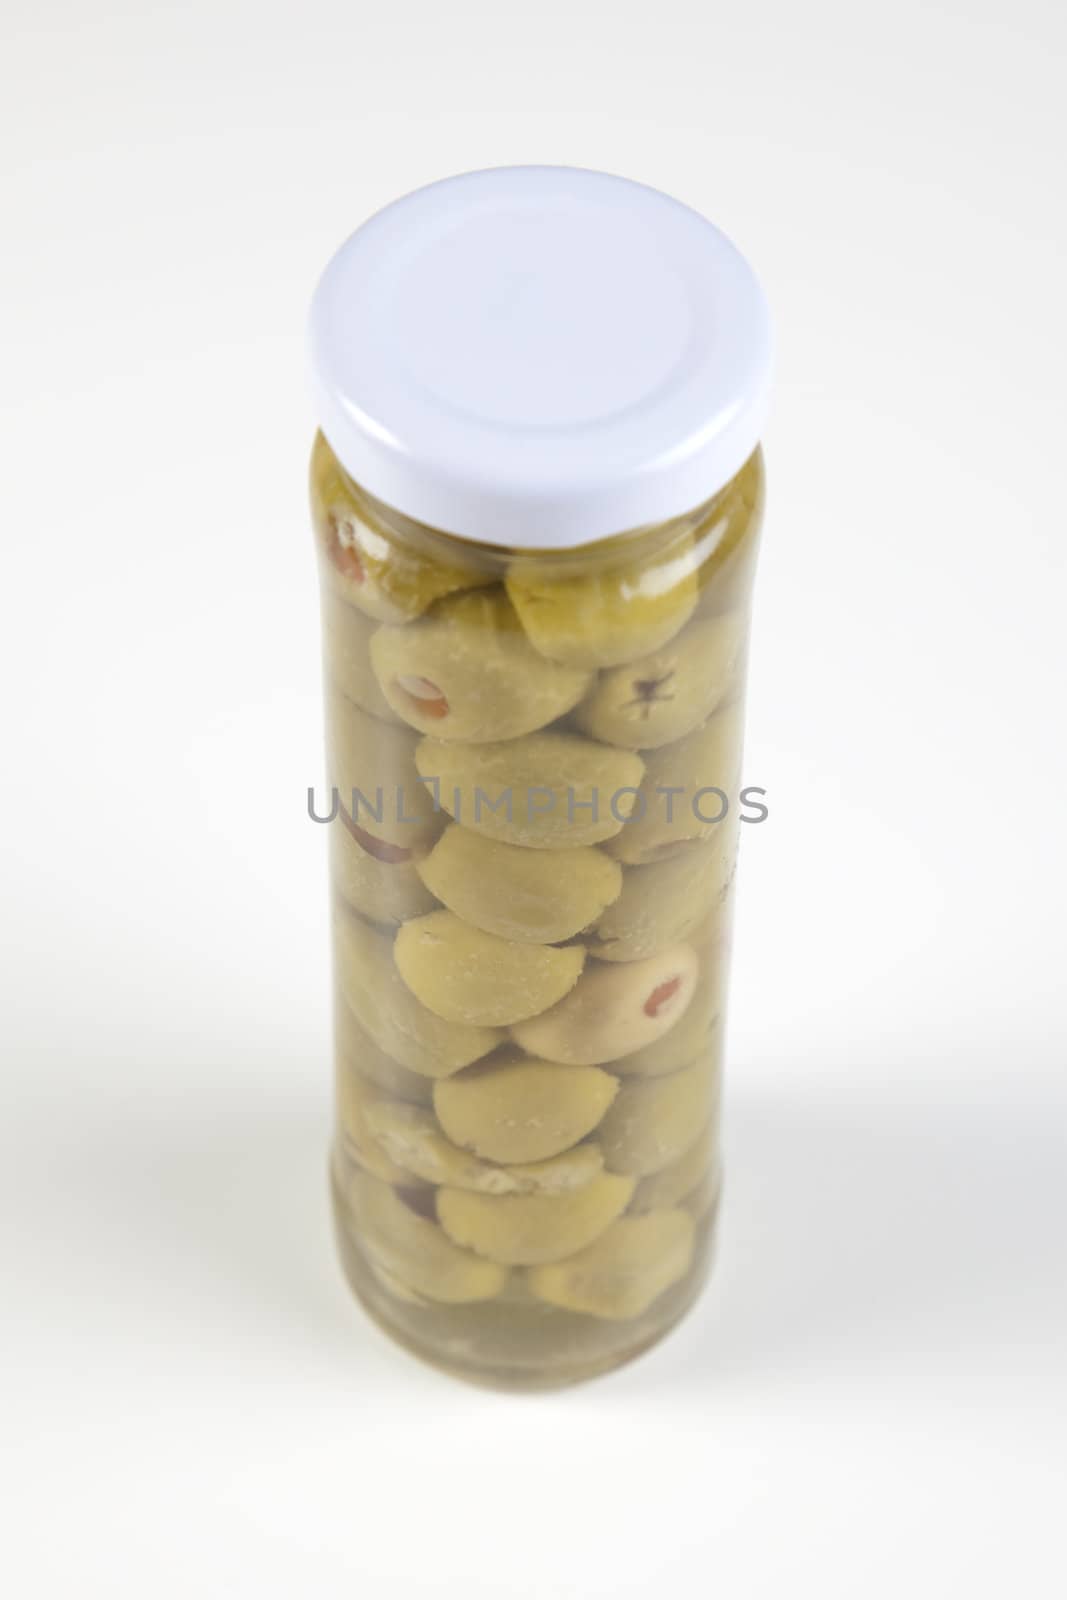 Small Olive in glass on white background